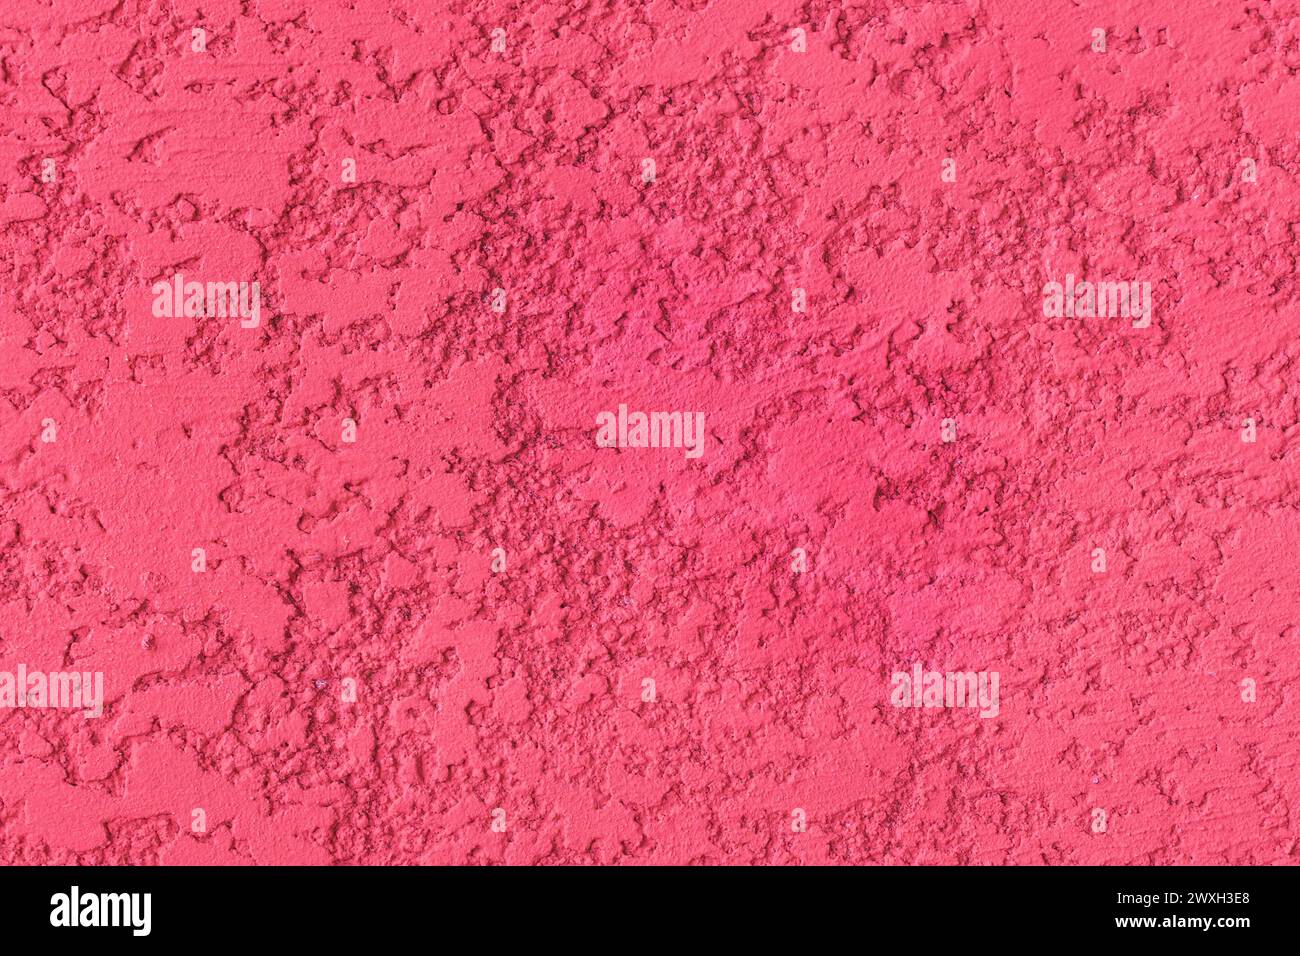 Pink paint rough plaster wall surface solid abstract stucco pattern background texture cement. Stock Photo